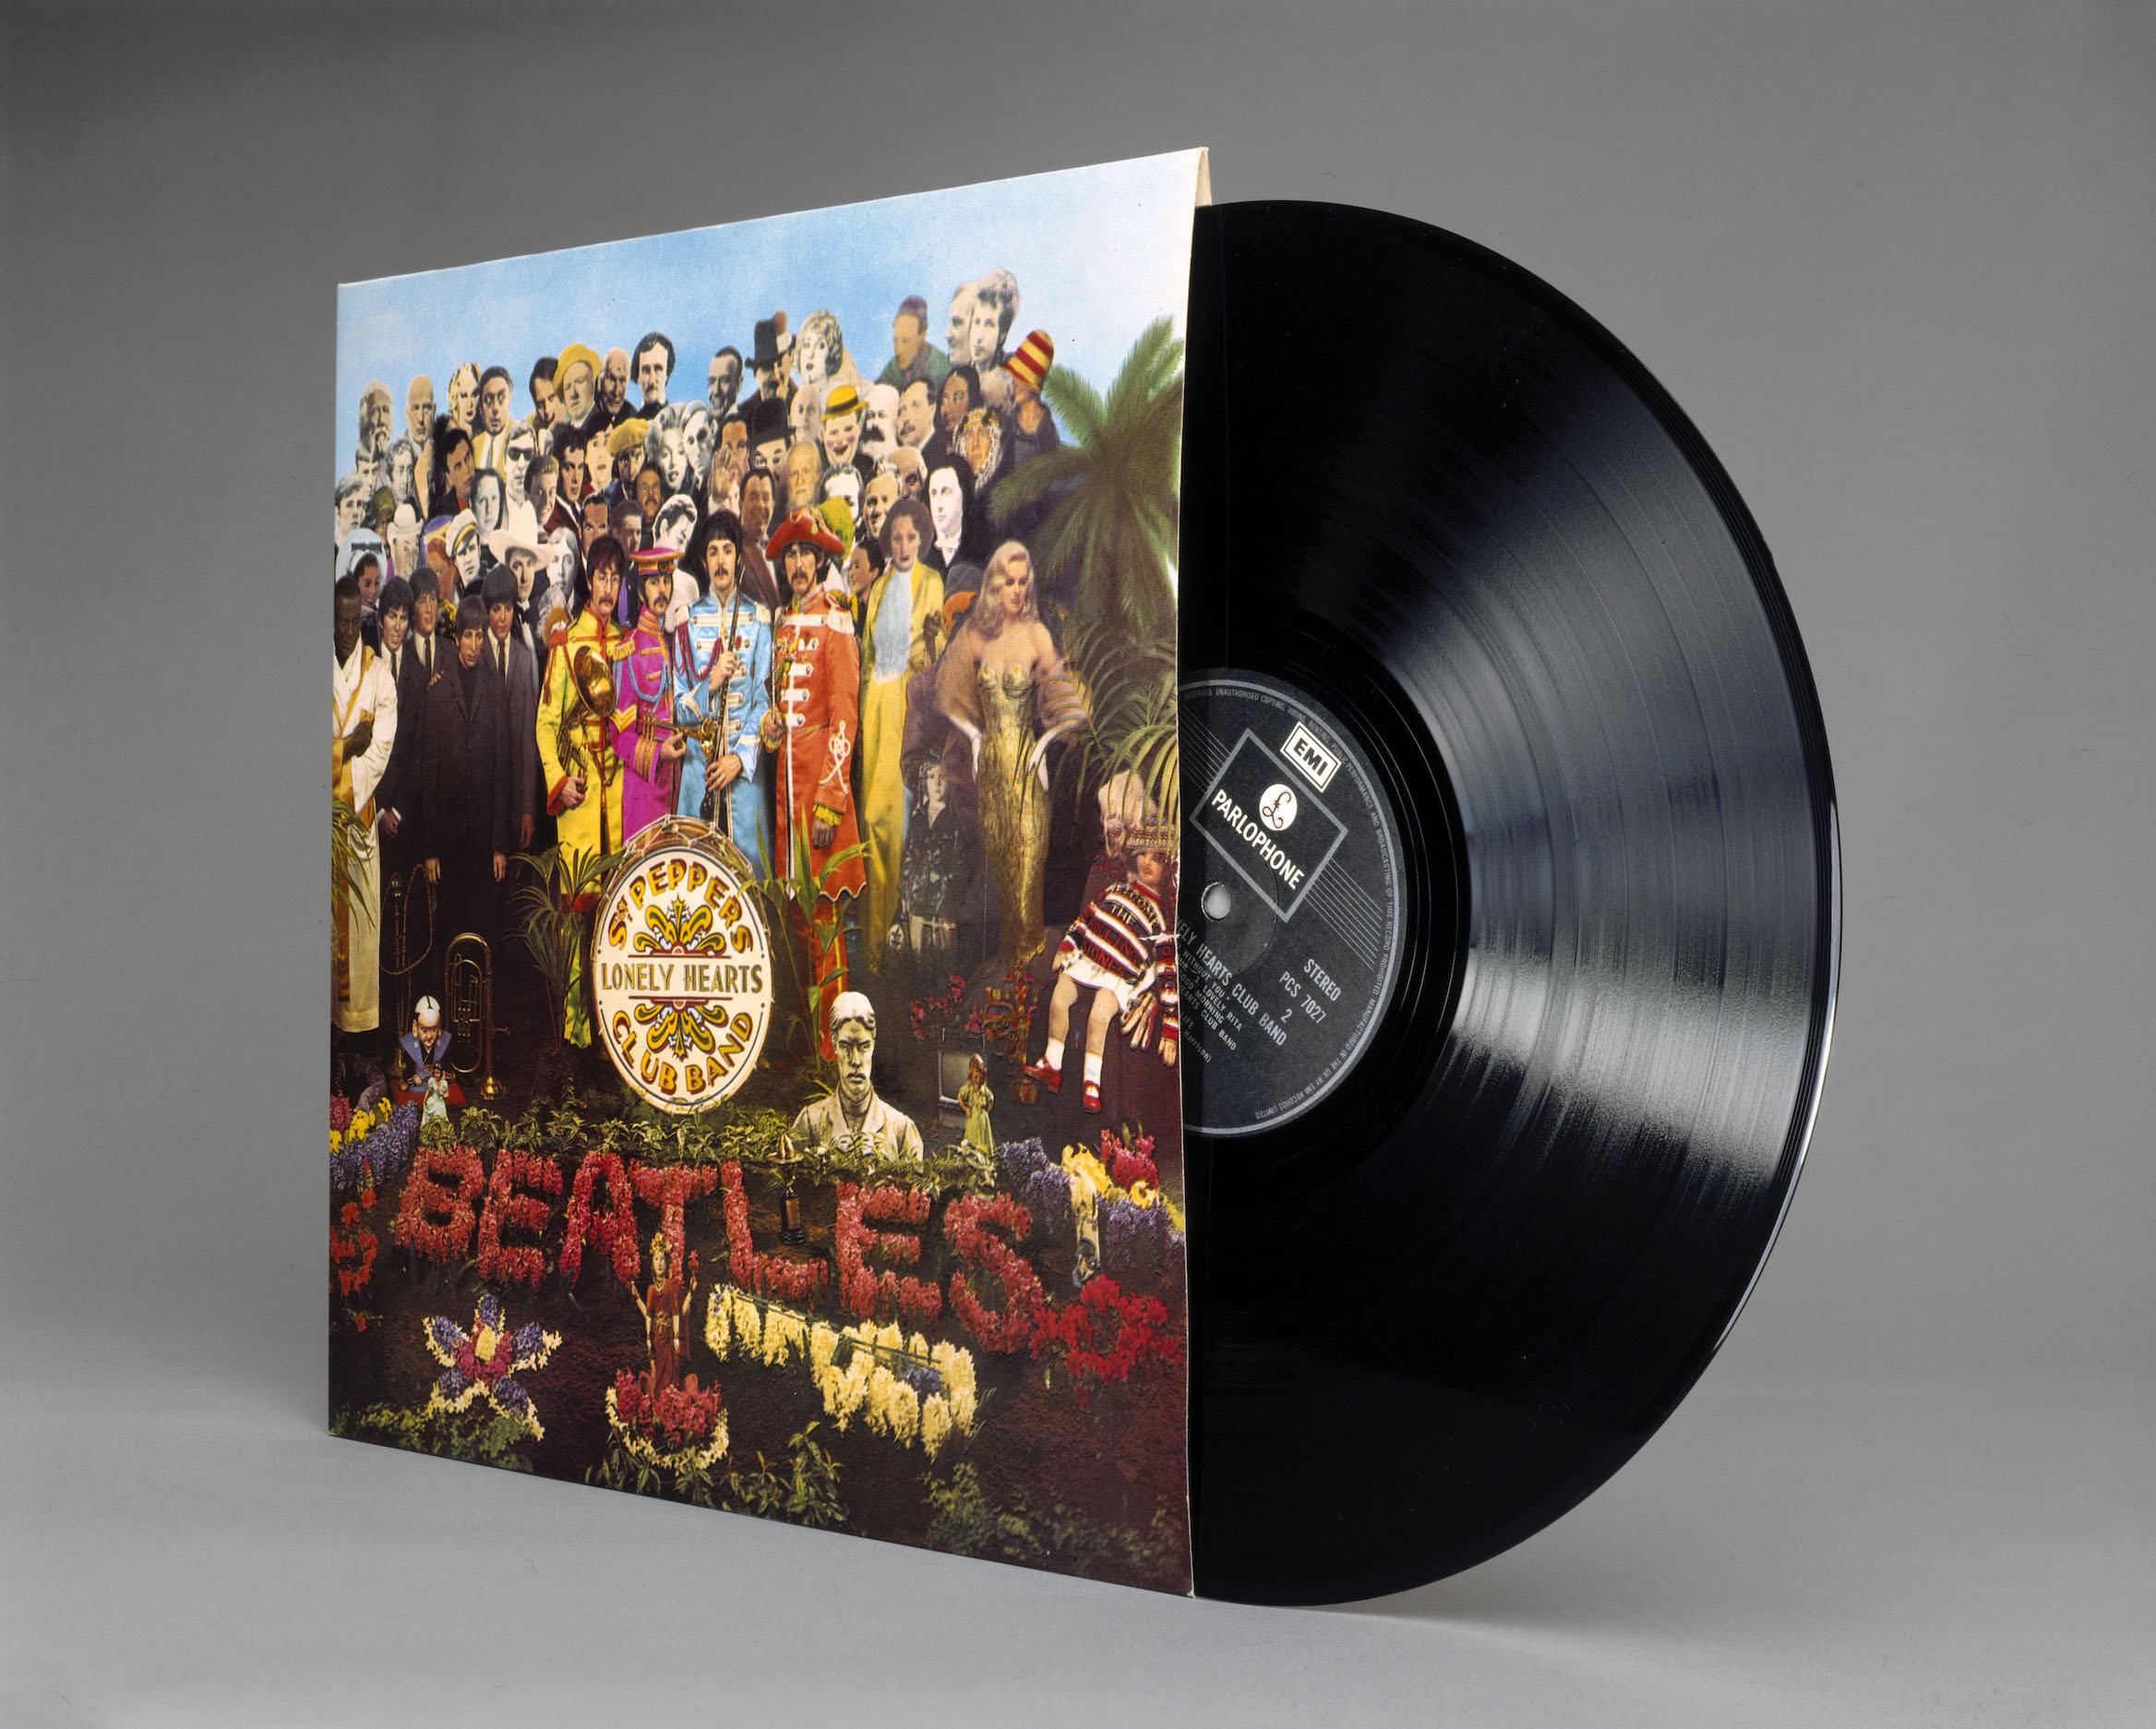 A vinyl of Sgt. Pepper's Lonely Hearts Club Band by The Beatles